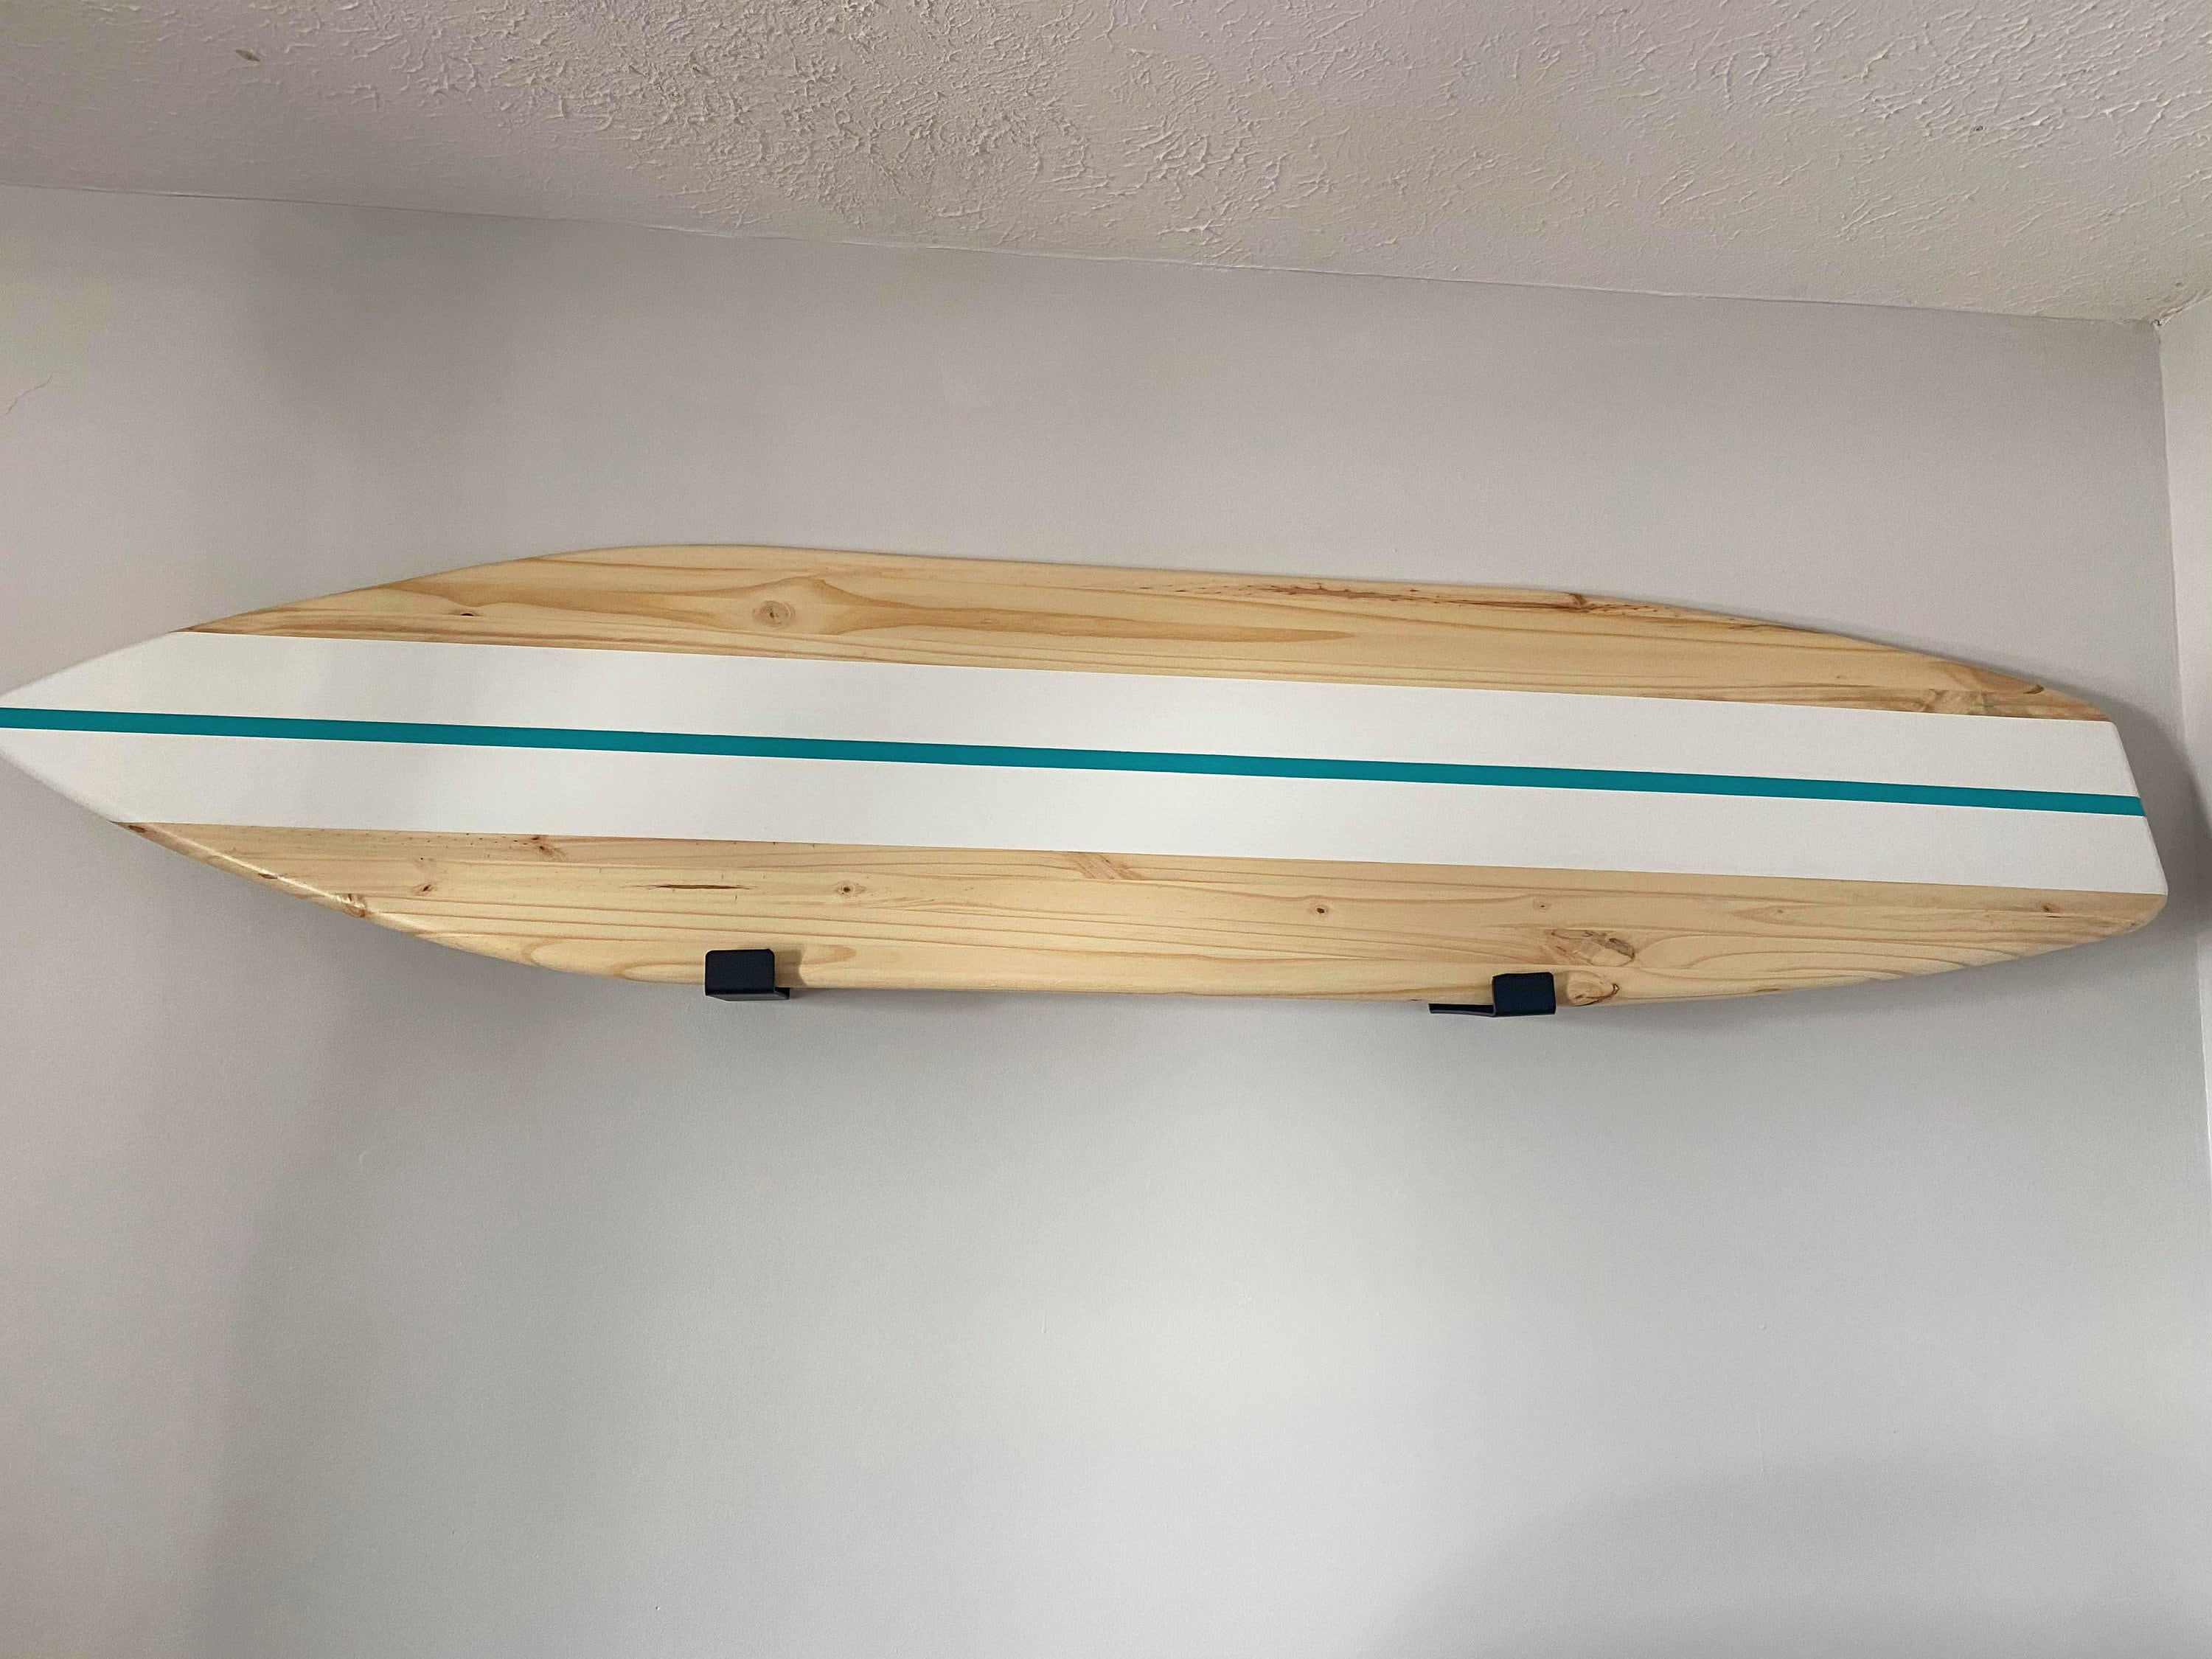 6 foot wood surfboard wall art decor with natural wood and red stripes